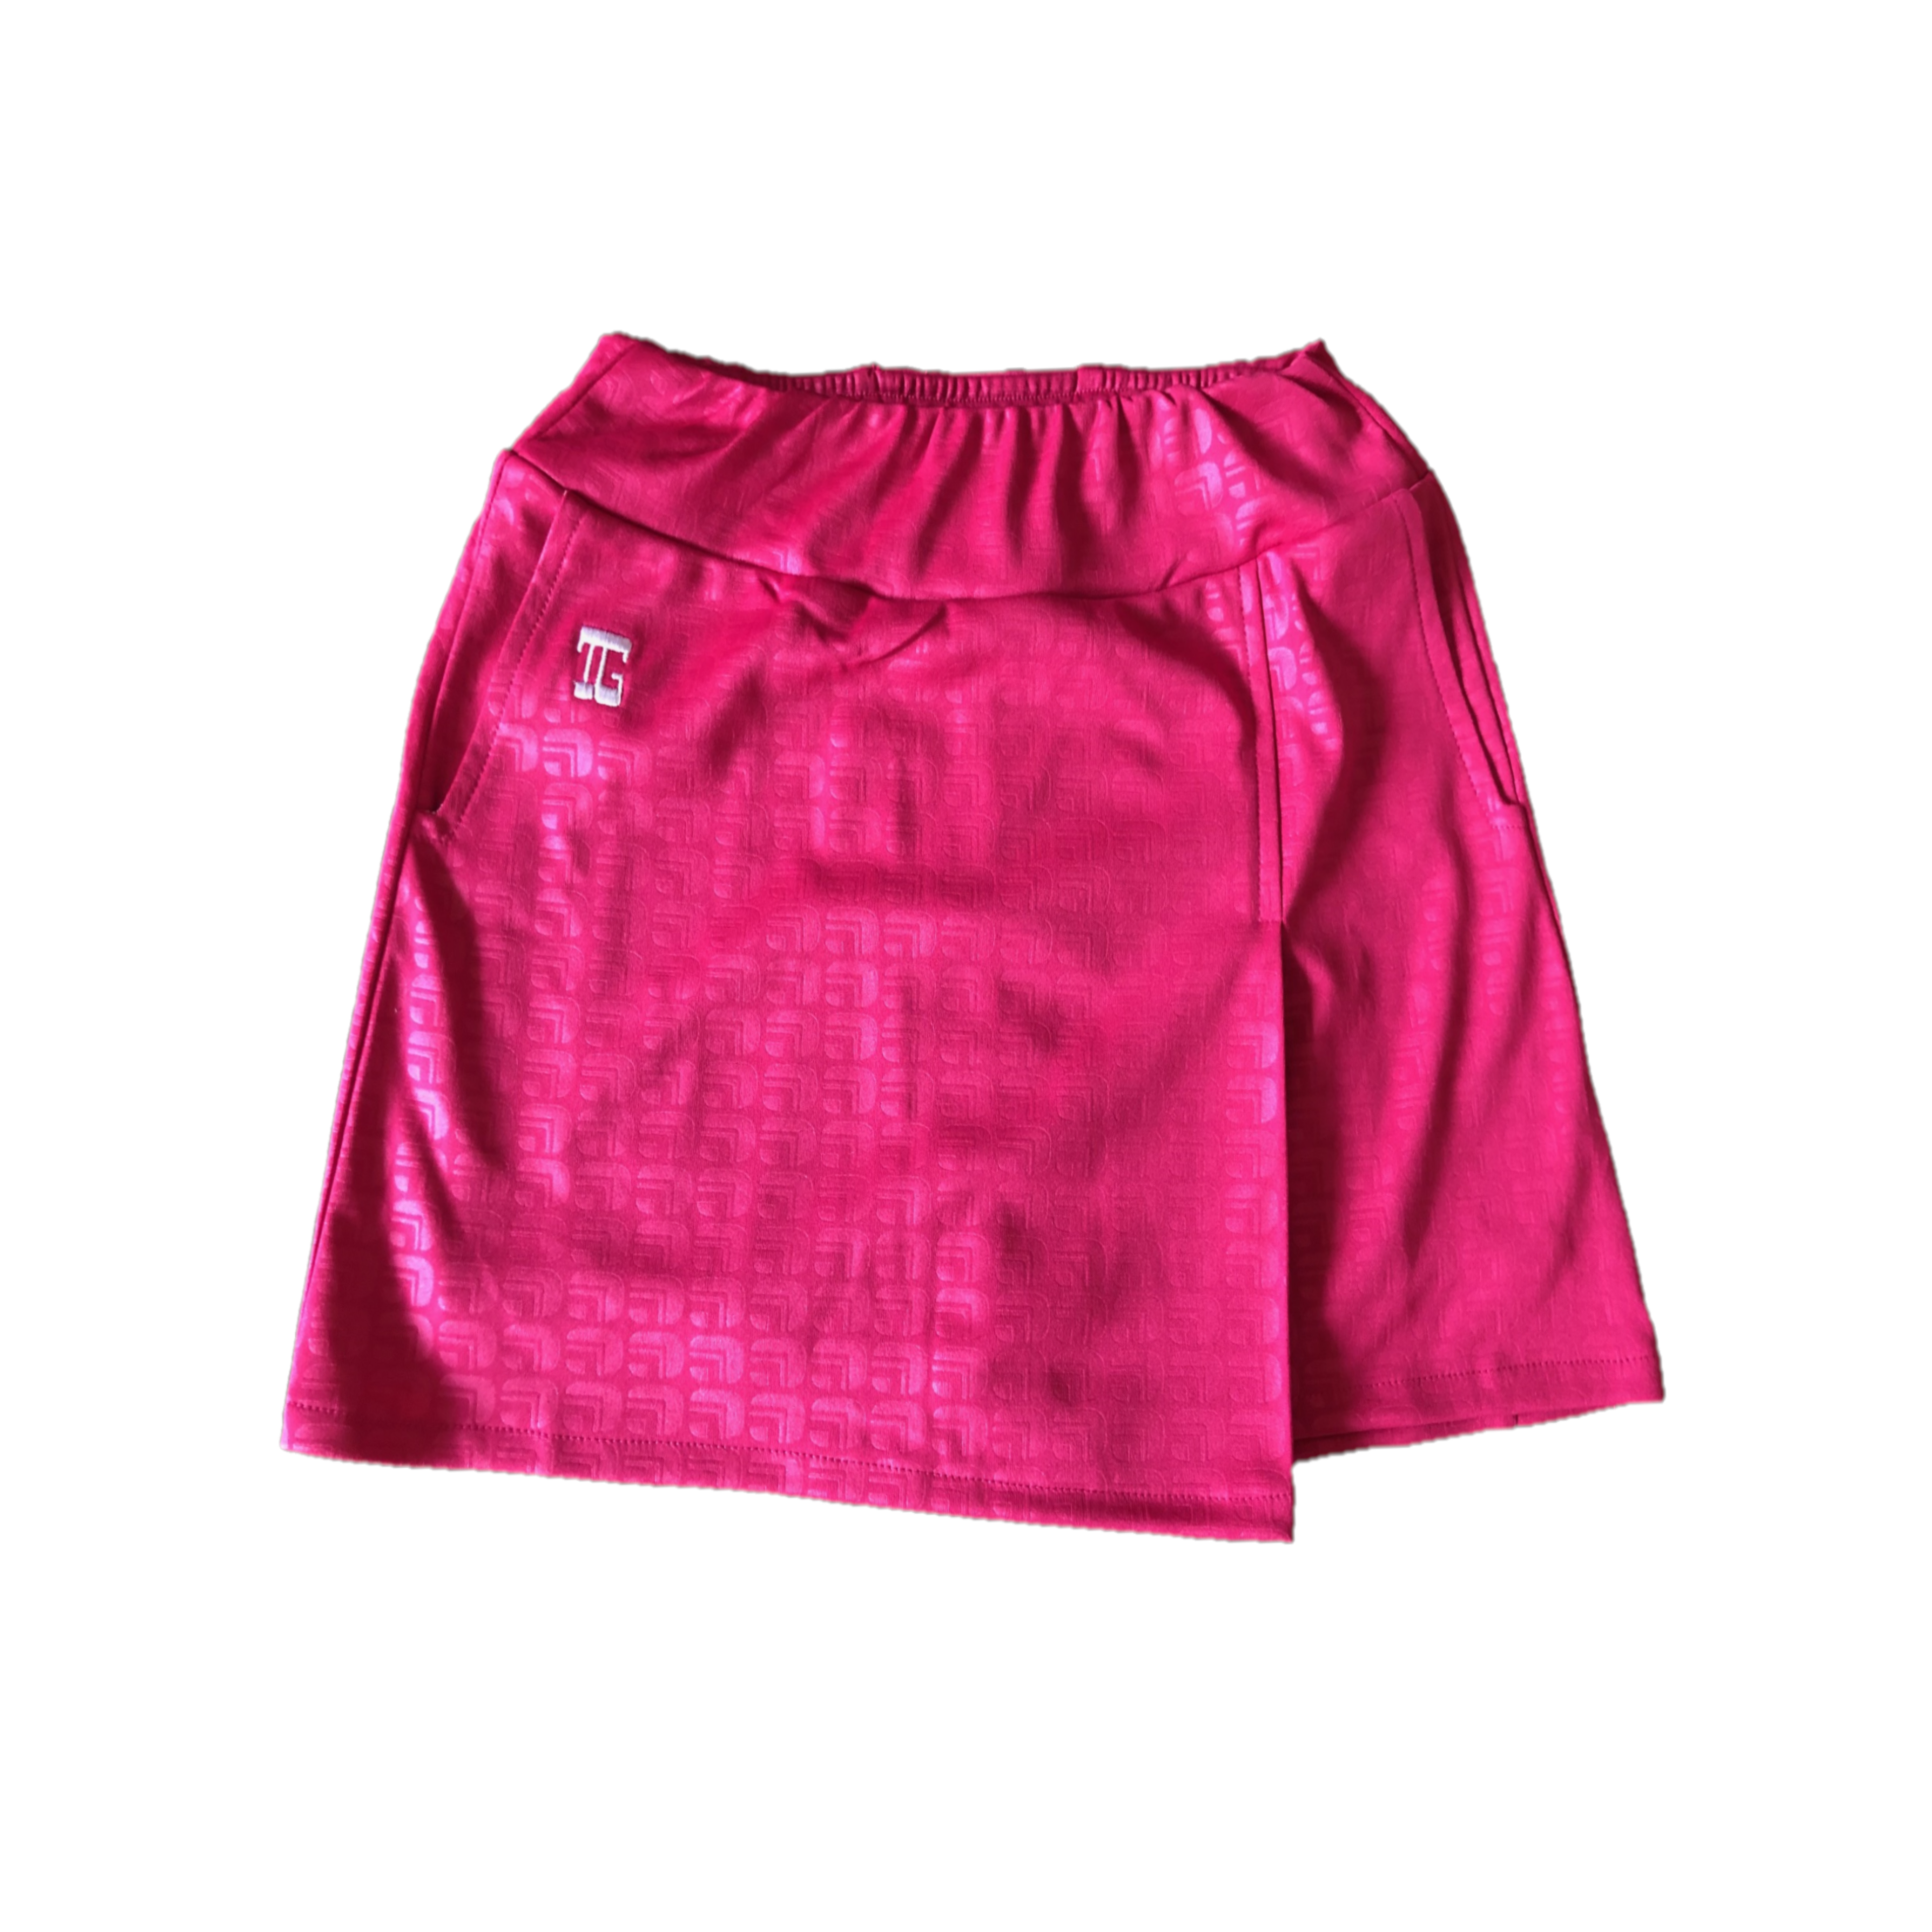 LS-066A || Skirt Dark Pink With Silvery Pink Faux Embossed Motif Rear Pocket